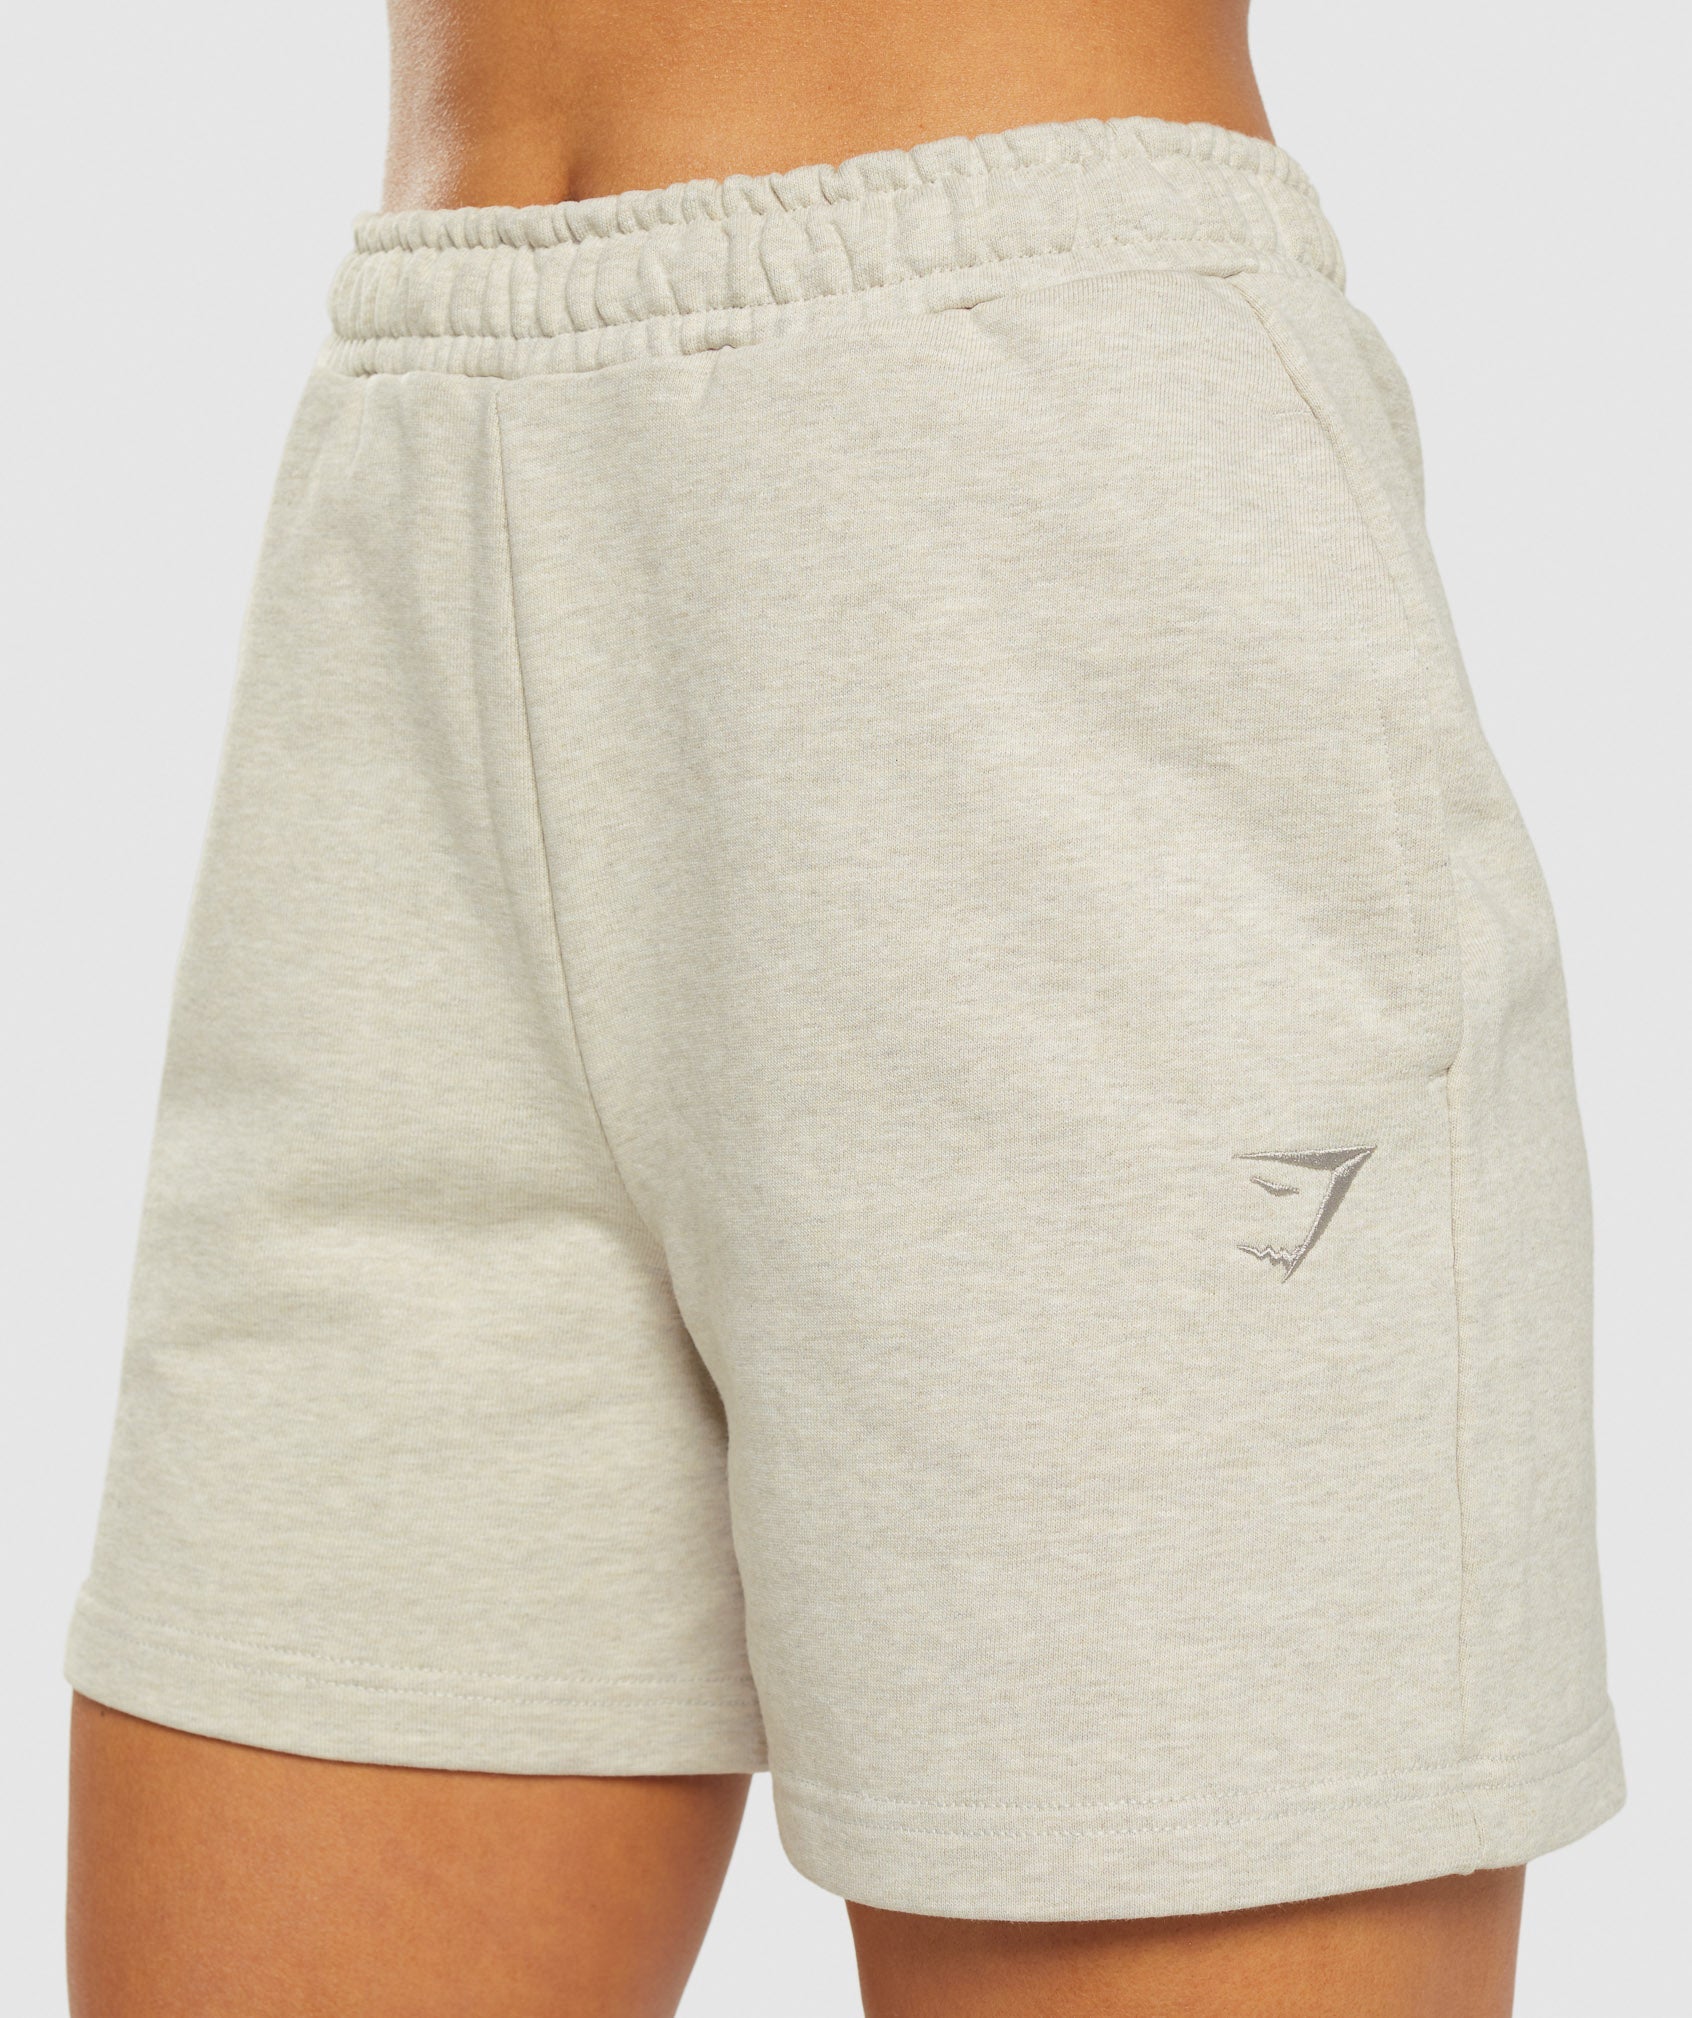 Rest Day Sweats Shorts